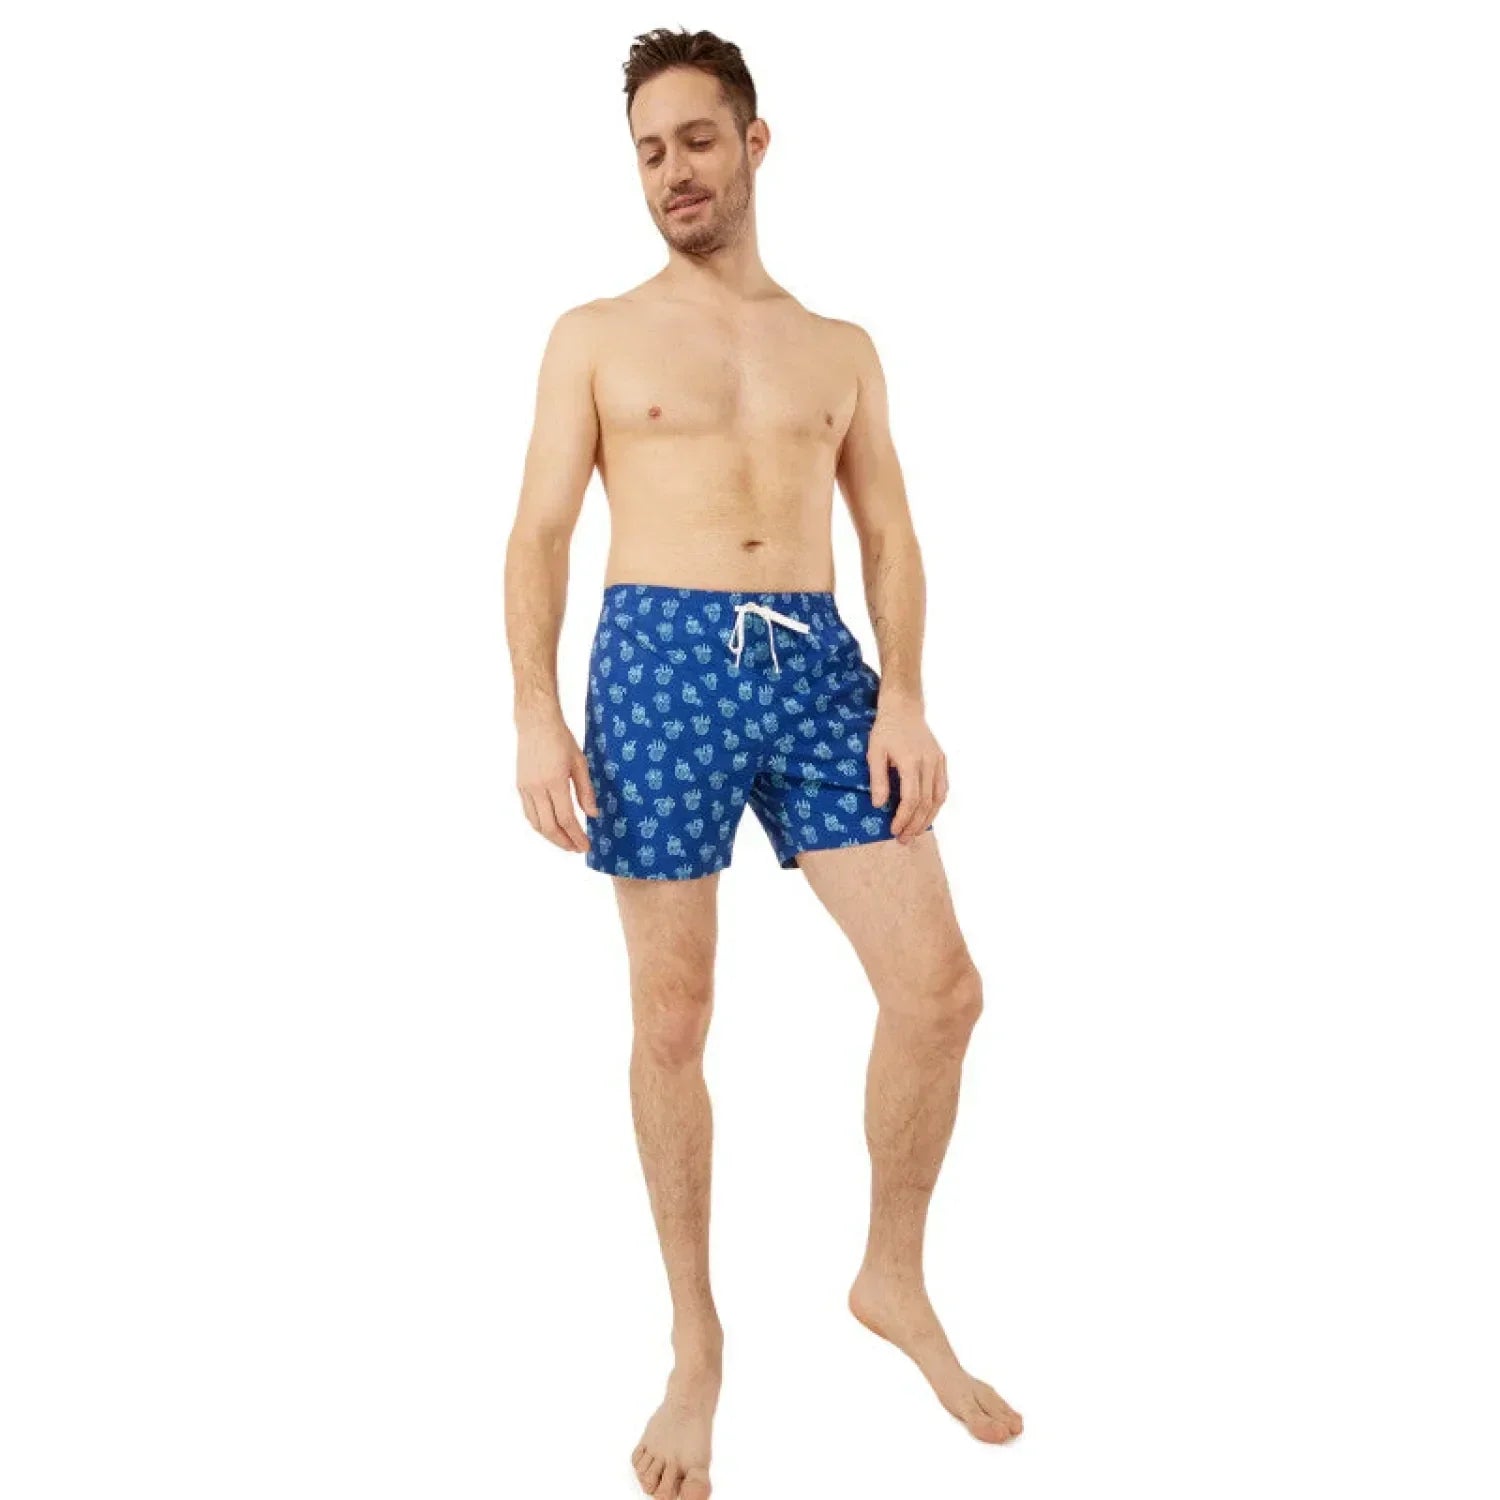 Chubbies 01. MENS APPAREL - MENS SHORTS - MENS SHORTS ACTIVE Men's The Classic Trunk - 5.5 in THE COLADAS